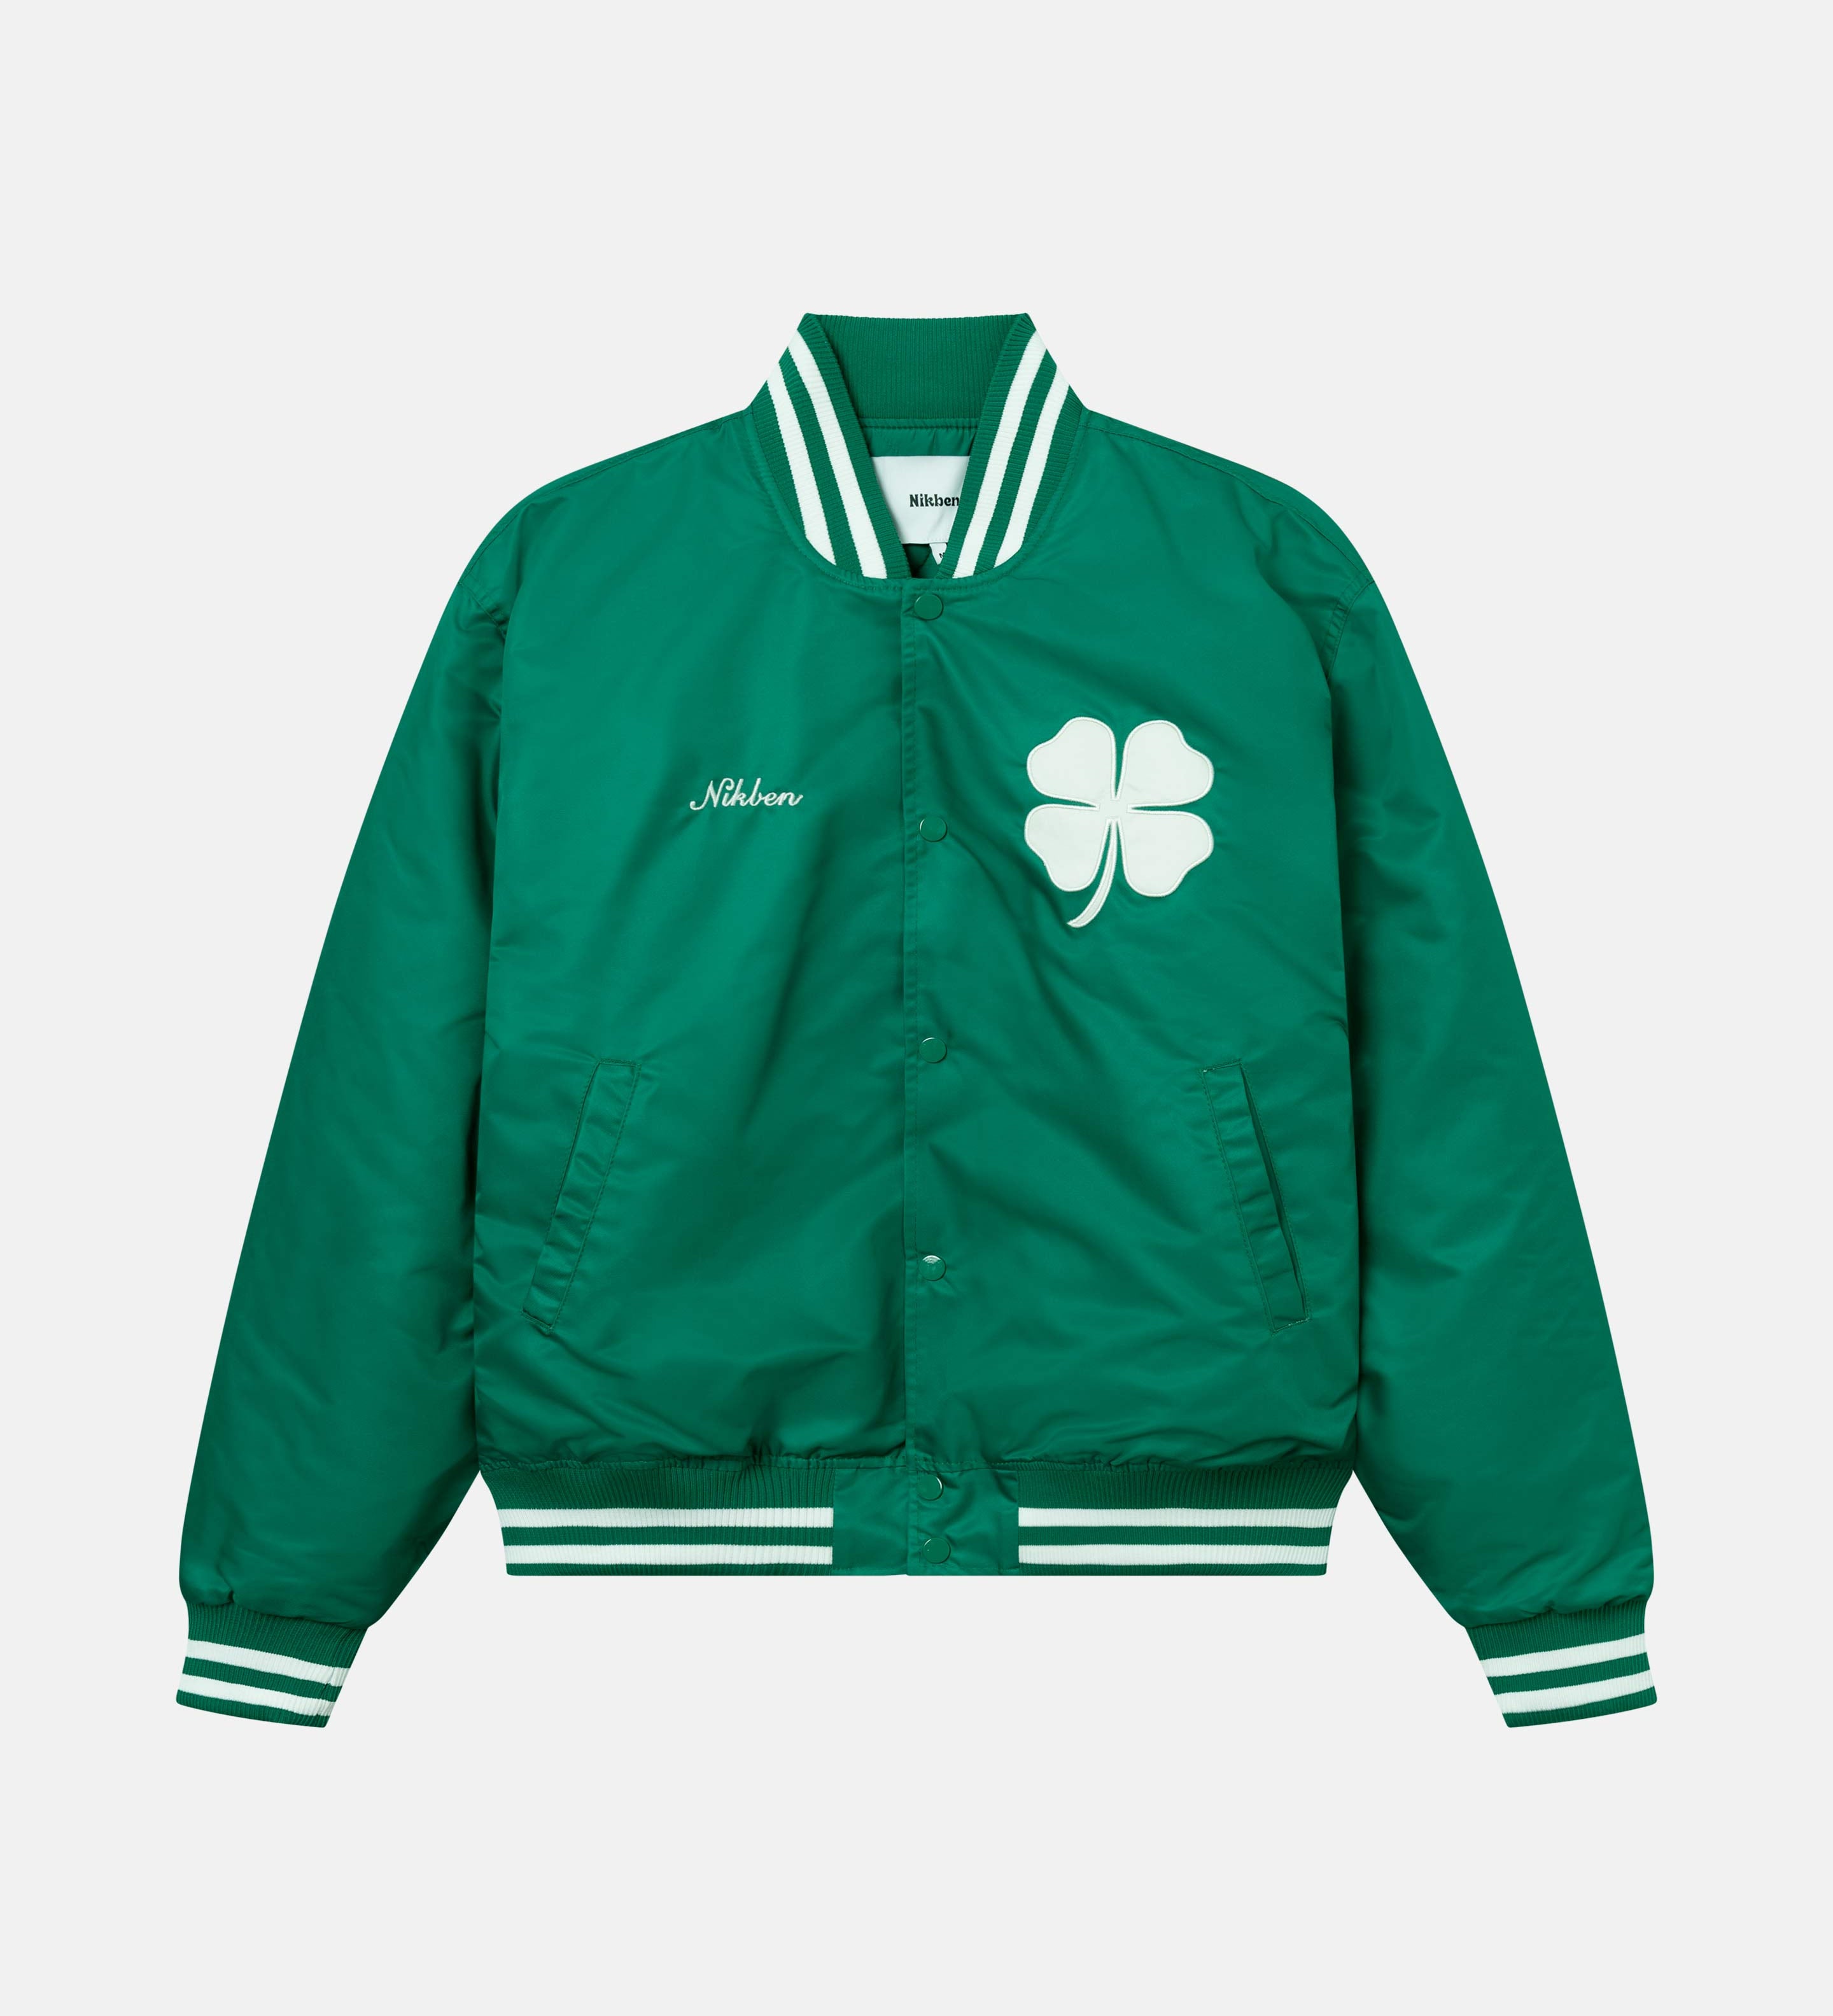 Green 80s style baseball jacket with embroidered "Nikben" script logo and "clover" logo